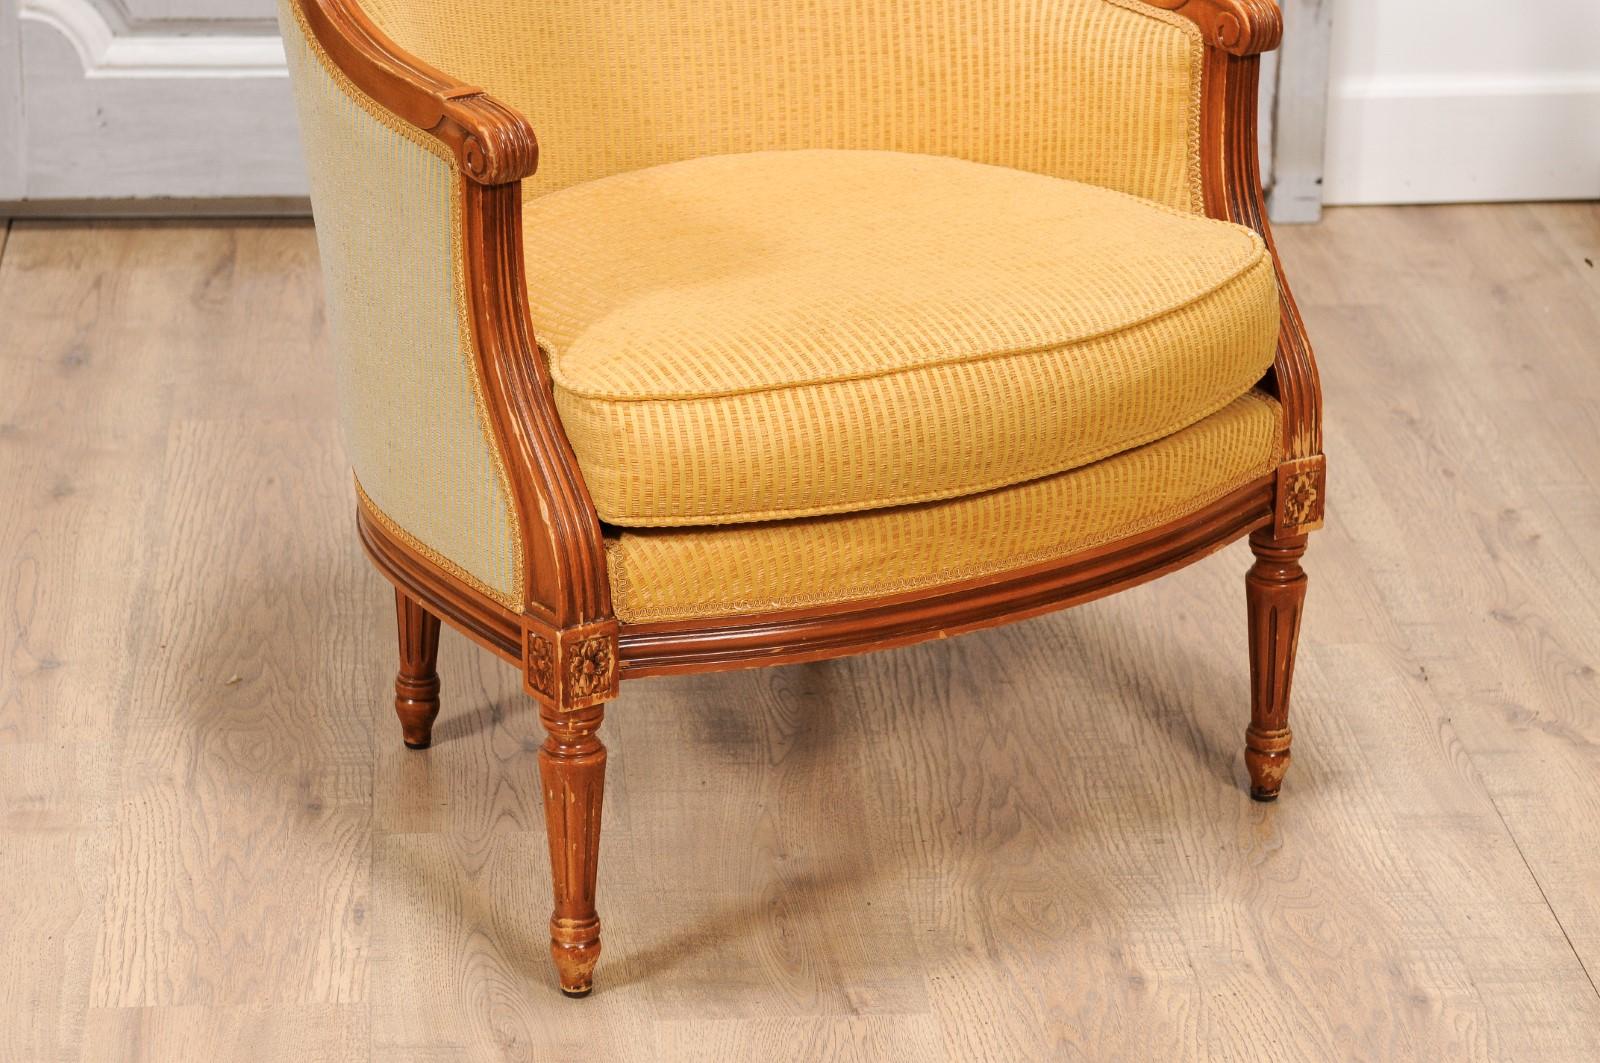 French Louis XVI Style Walnut Bergères Chairs with Wraparound Backs, Pair For Sale 6